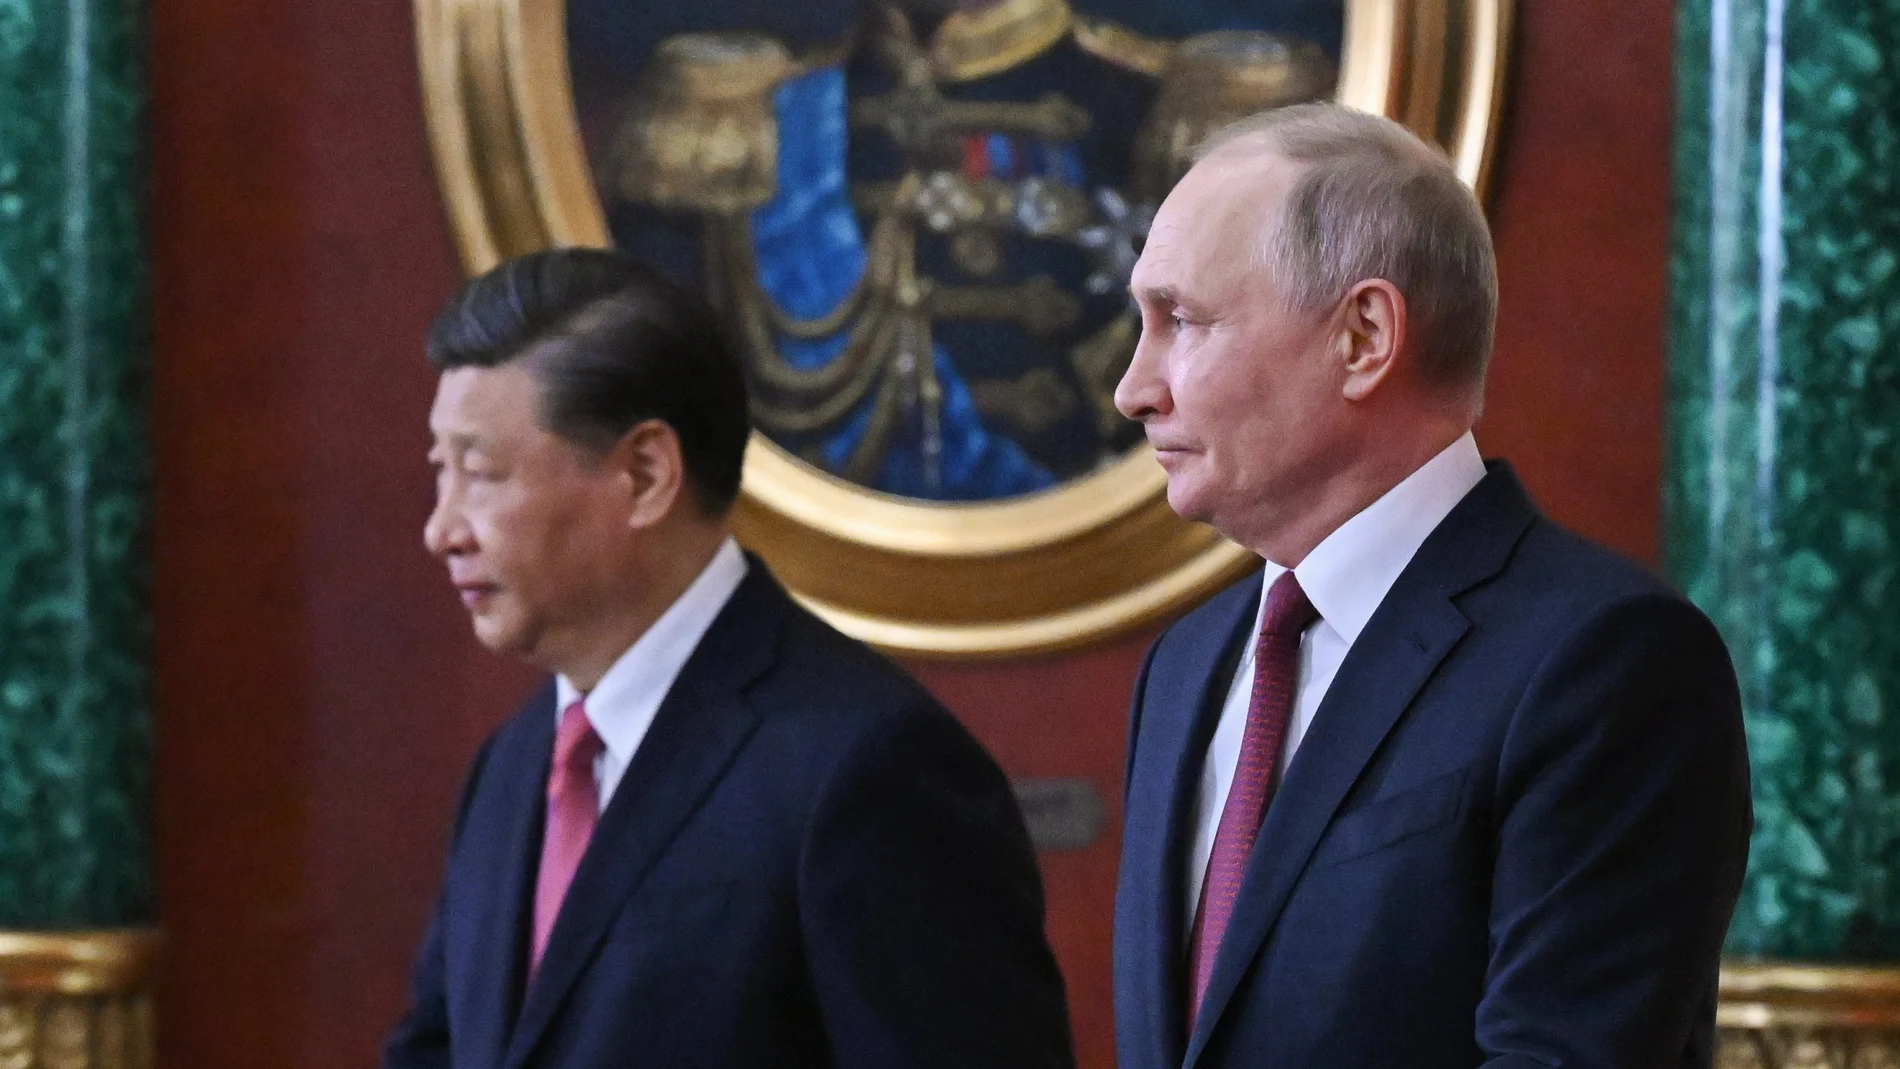 Moscow (Russian Federation), 20/03/2023.- Chinese President Xi Jinping (L) and Russian President Vladimir Putin (R) enter a hall for the documents signing ceremony after their Russia - China talks at the Kremlin in Moscow, Russia, 21 March 2023. Chinese President Xi Jinping arrived in Moscow on a three-day visit, which will last from March 20 to 22, according to Russian and Chinese state agencies. Xi Jinping visits Russia on improving joint partnership and developing key areas of Russian-Chinese economic cooperation. 